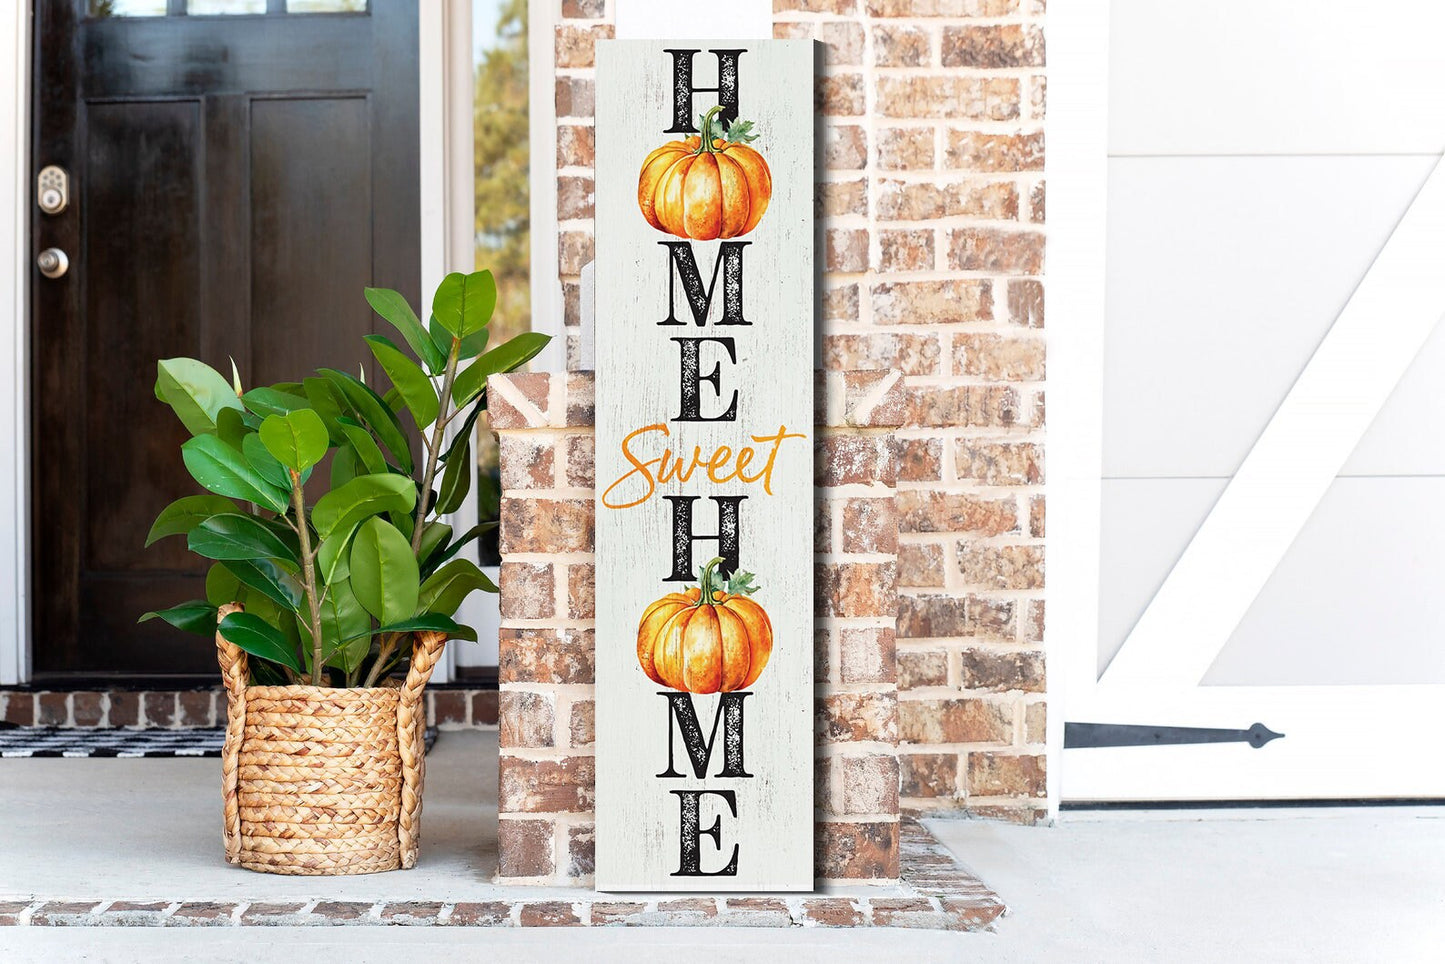 36in "Home Sweet Home" Fall Porch Sign - Pumpkin Sign for Front Door Decor during Autumn Celebrations